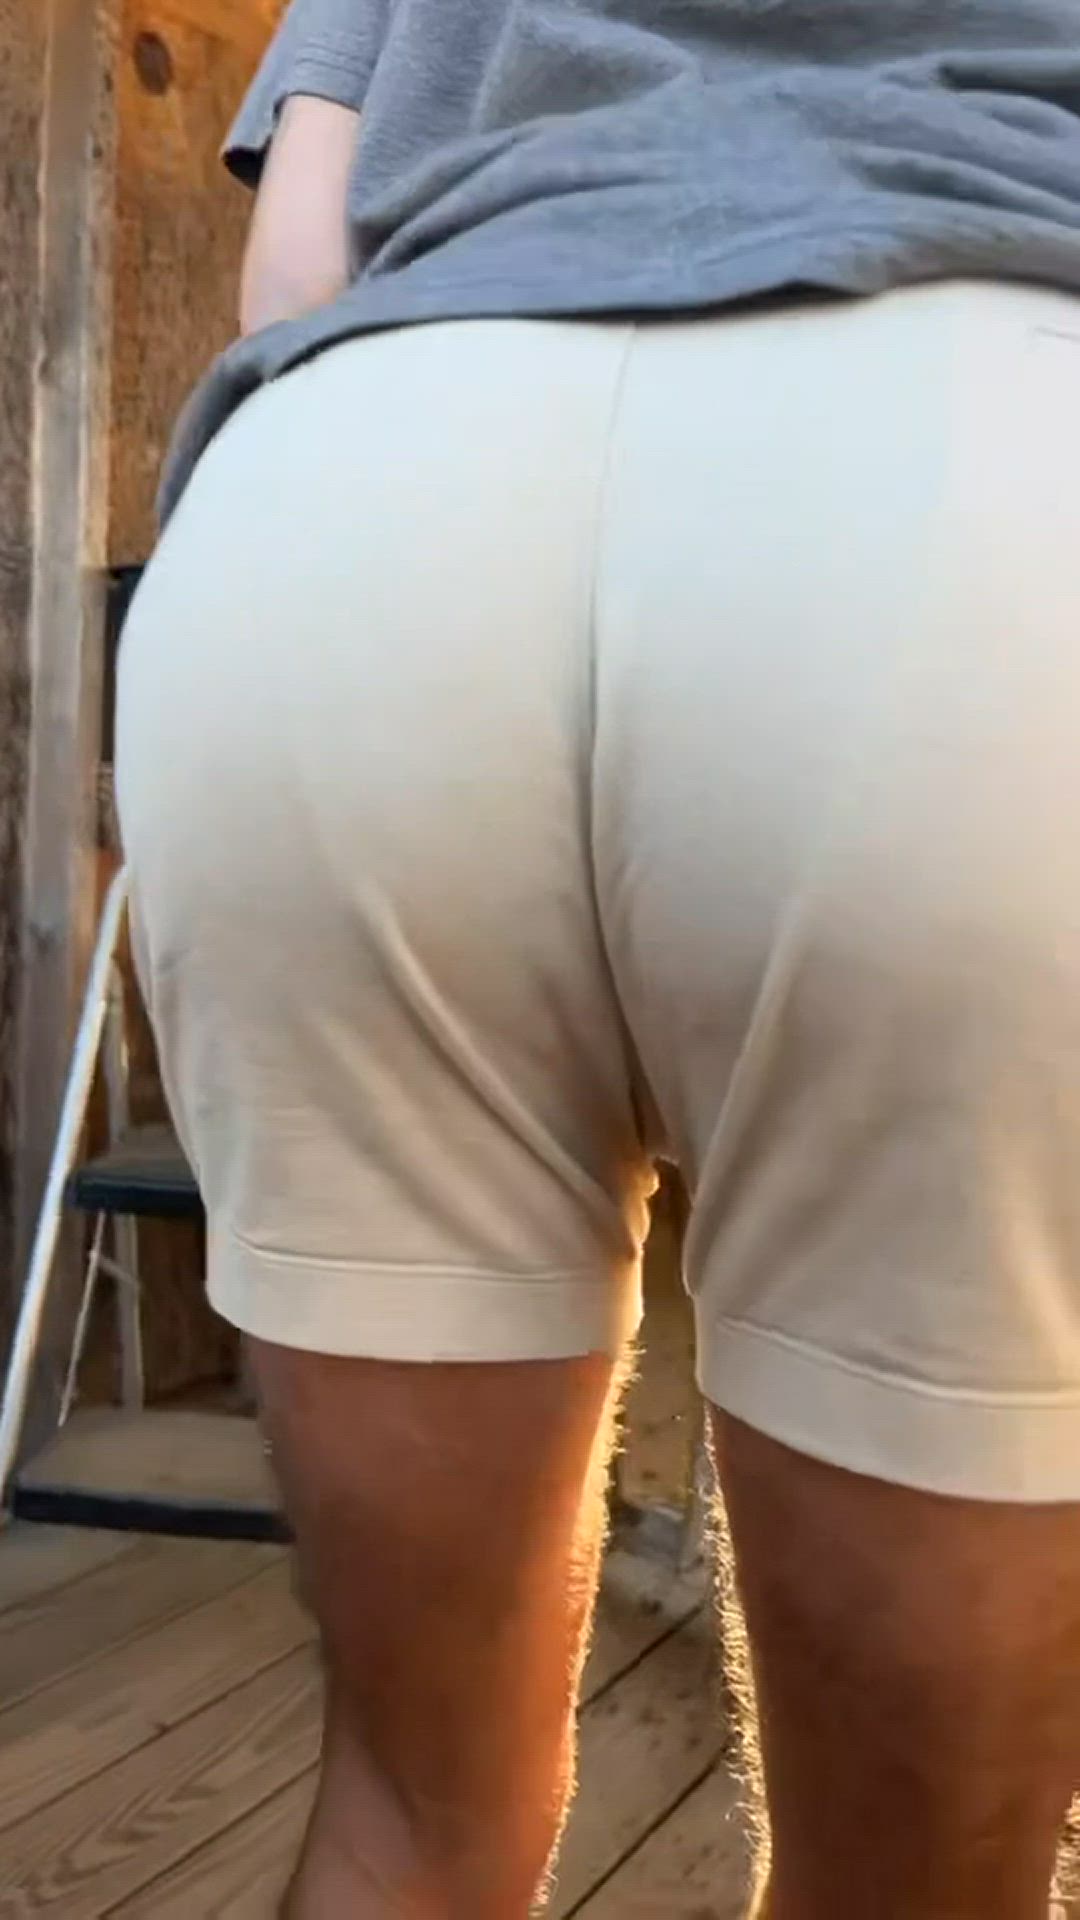 Ass porn video with onlyfans model ambrose anderson💘 <strong>@ambroseanderson</strong>